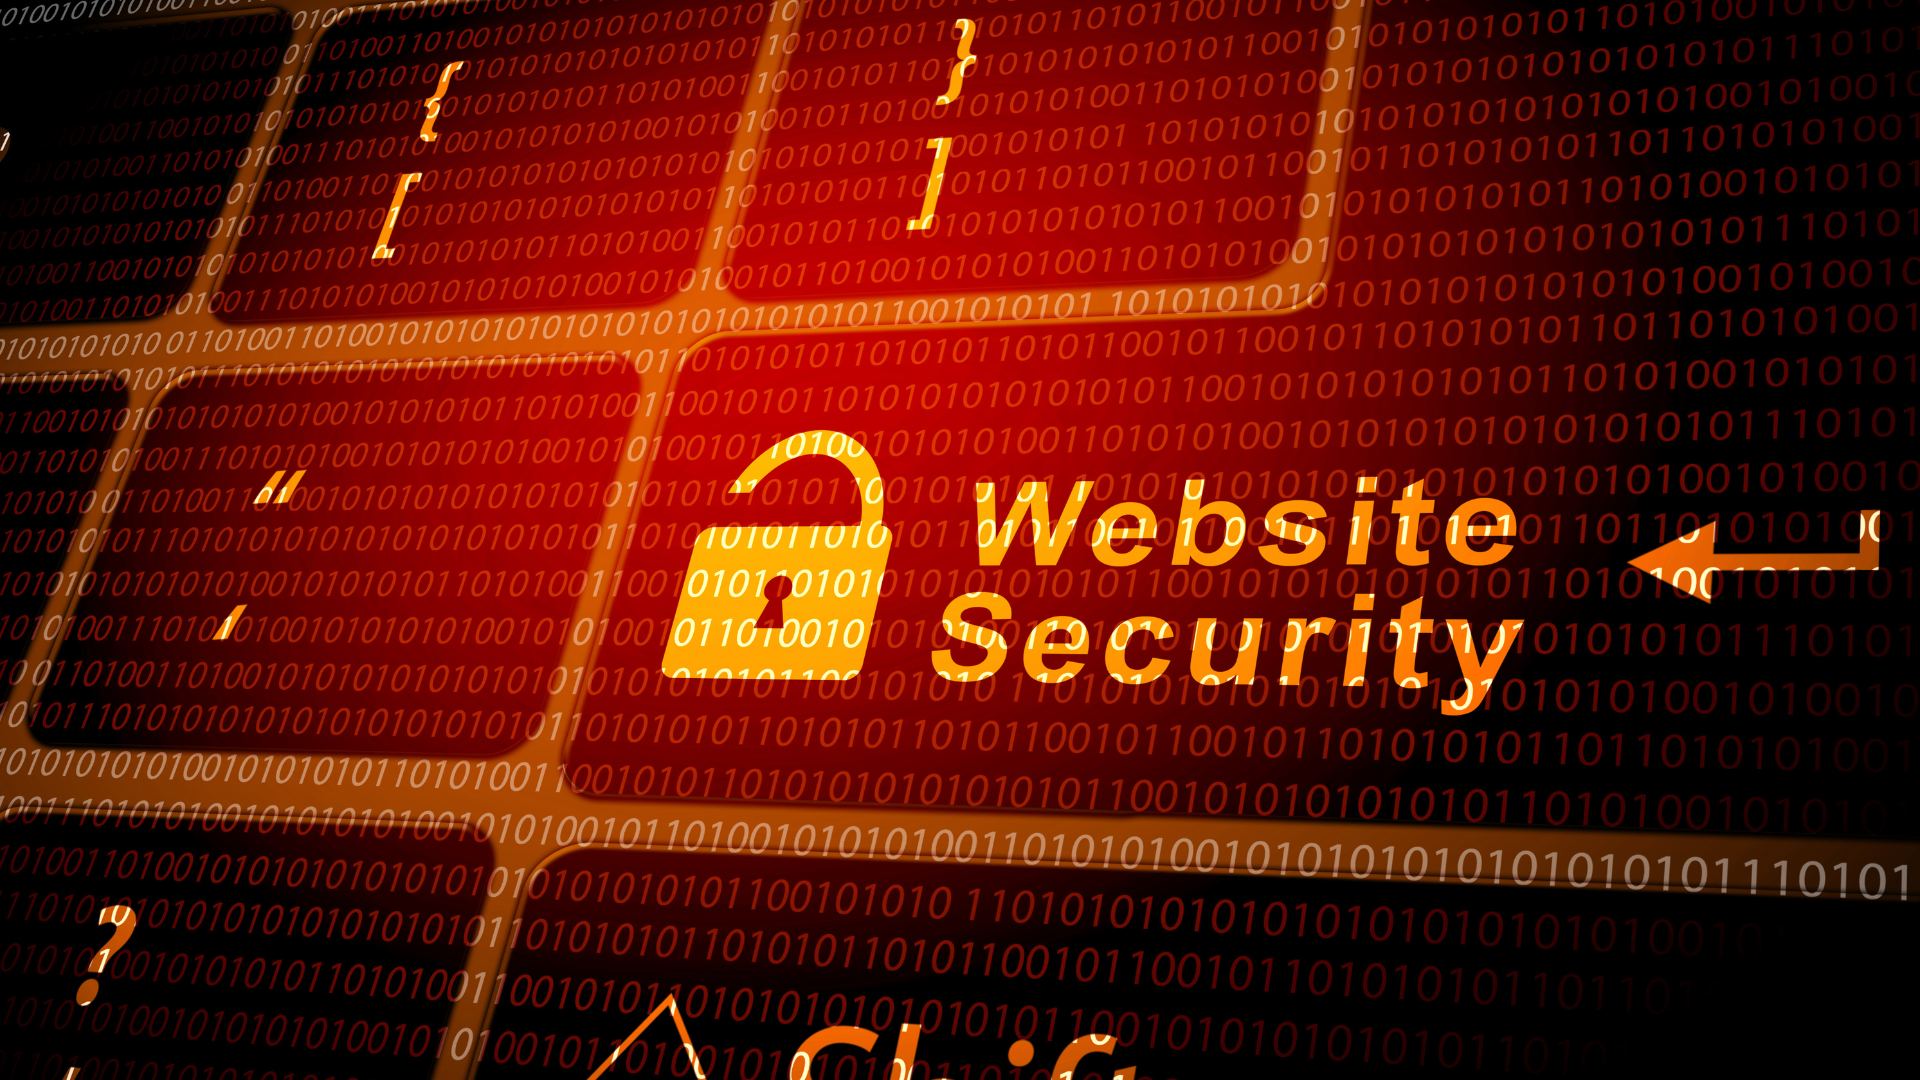 bsite security measures and protection in the digital age